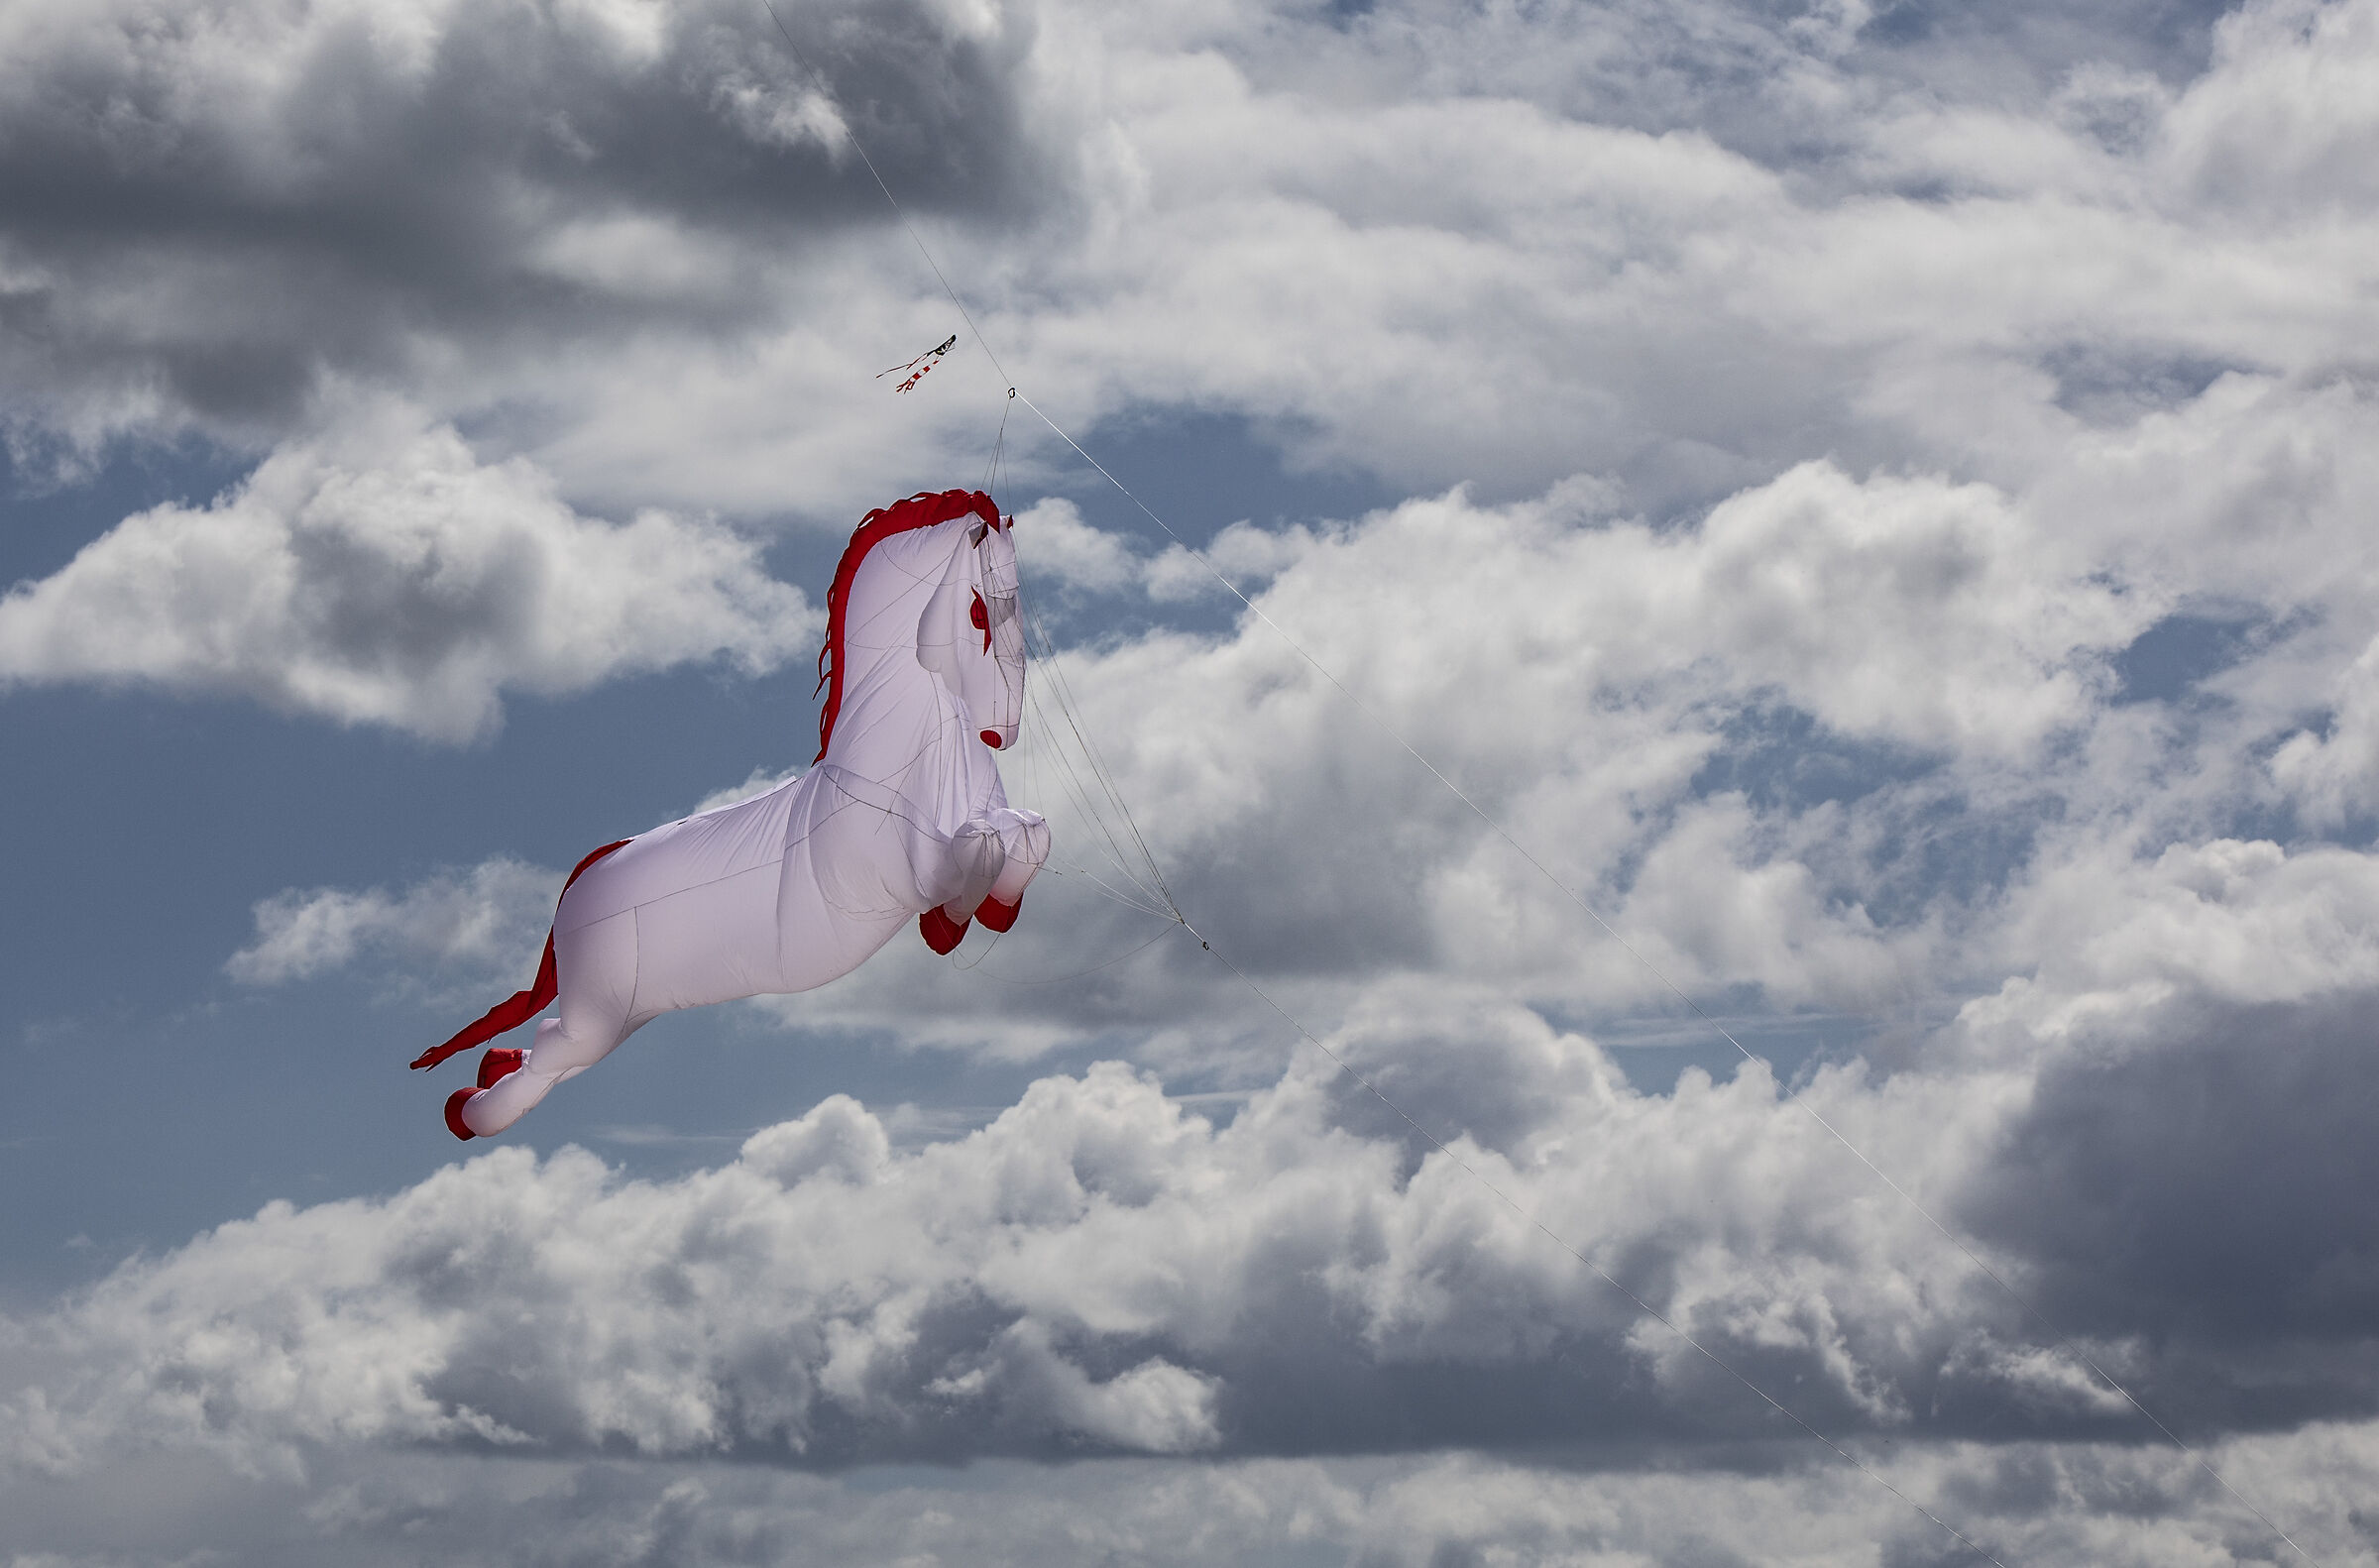 Galloping in the sky...